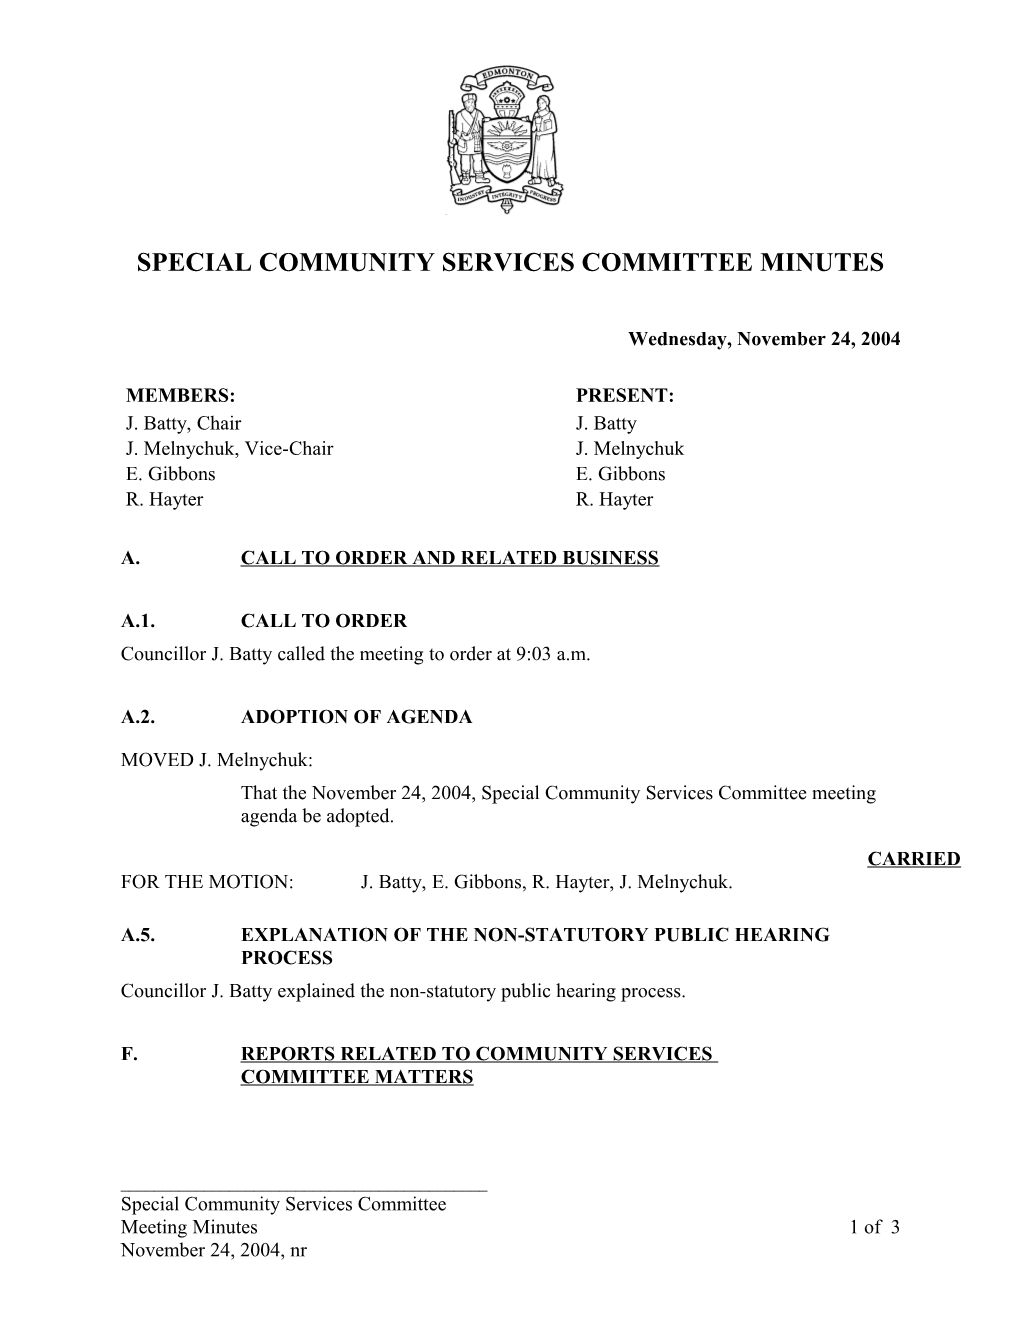 Minutes for Community Services Committee November 24, 2004 Meeting